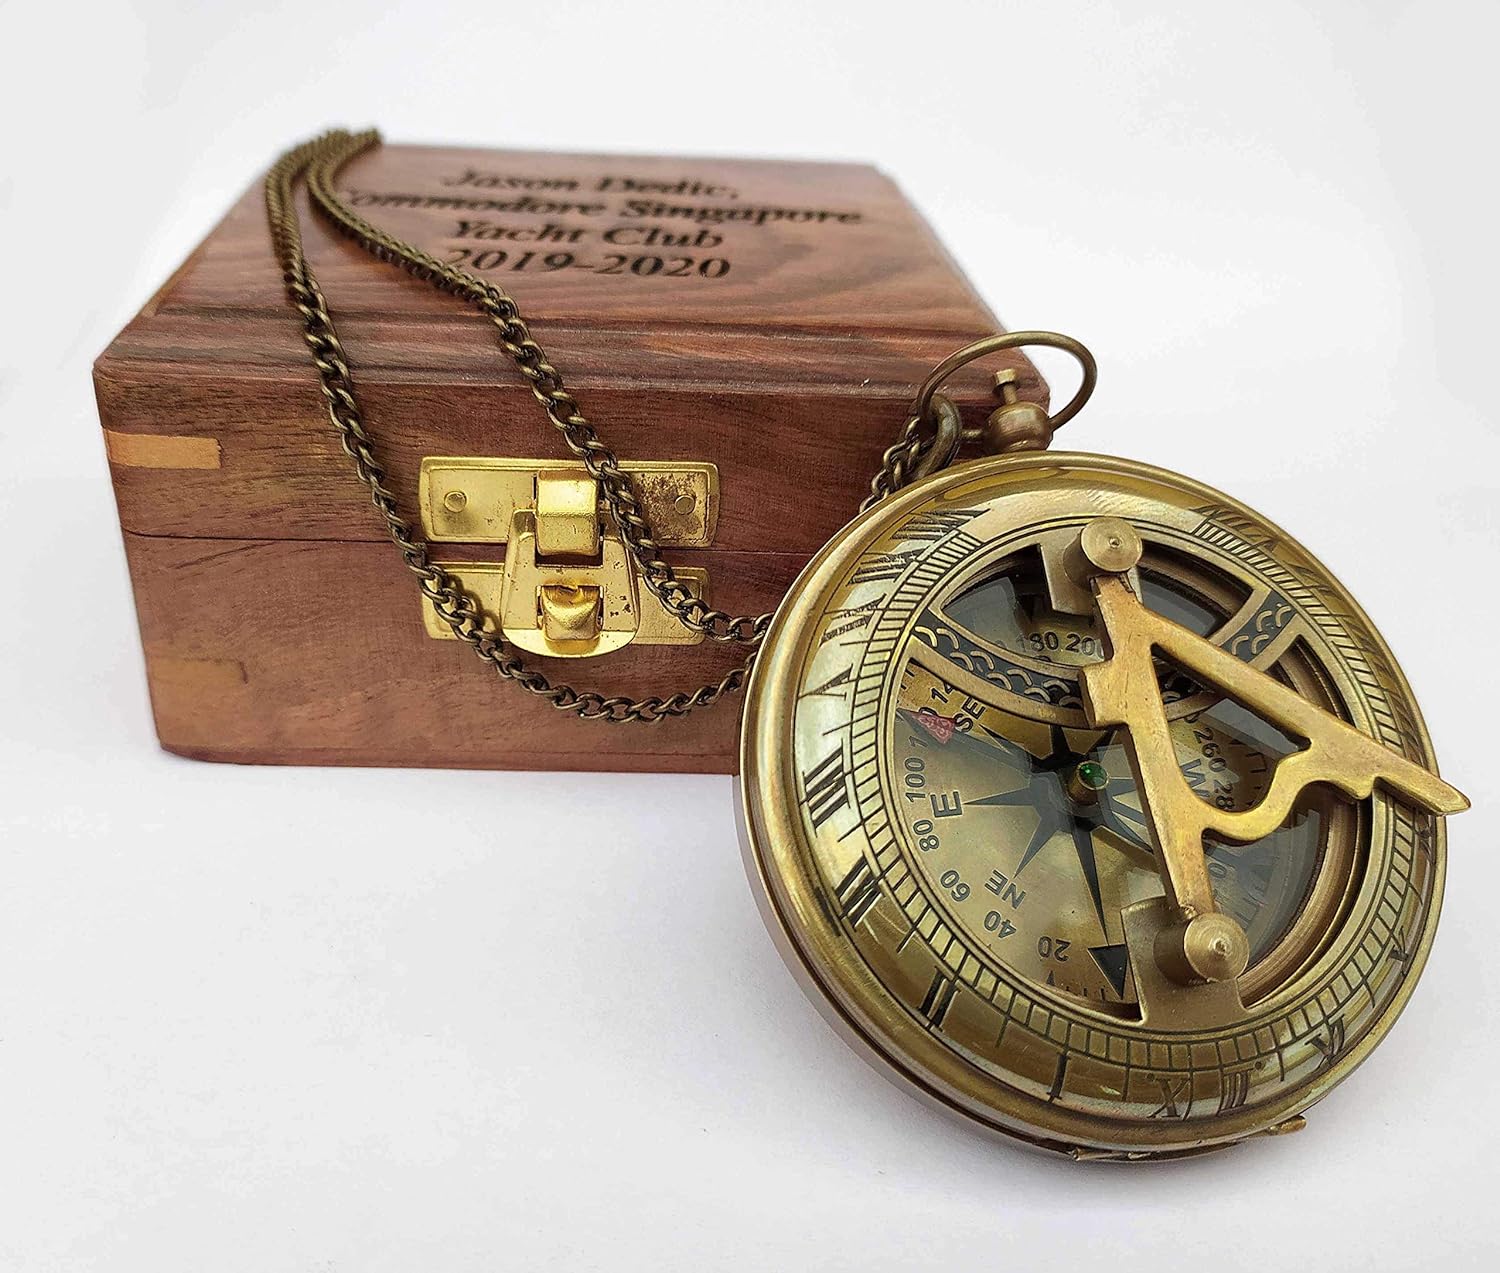 PORTHO Custom Push Button Sundial Compass with Wooden Box, Customization on Compass and/or Box, Best Personalized Gift for Travel, Hiking, Camping, Wedding, Baptism